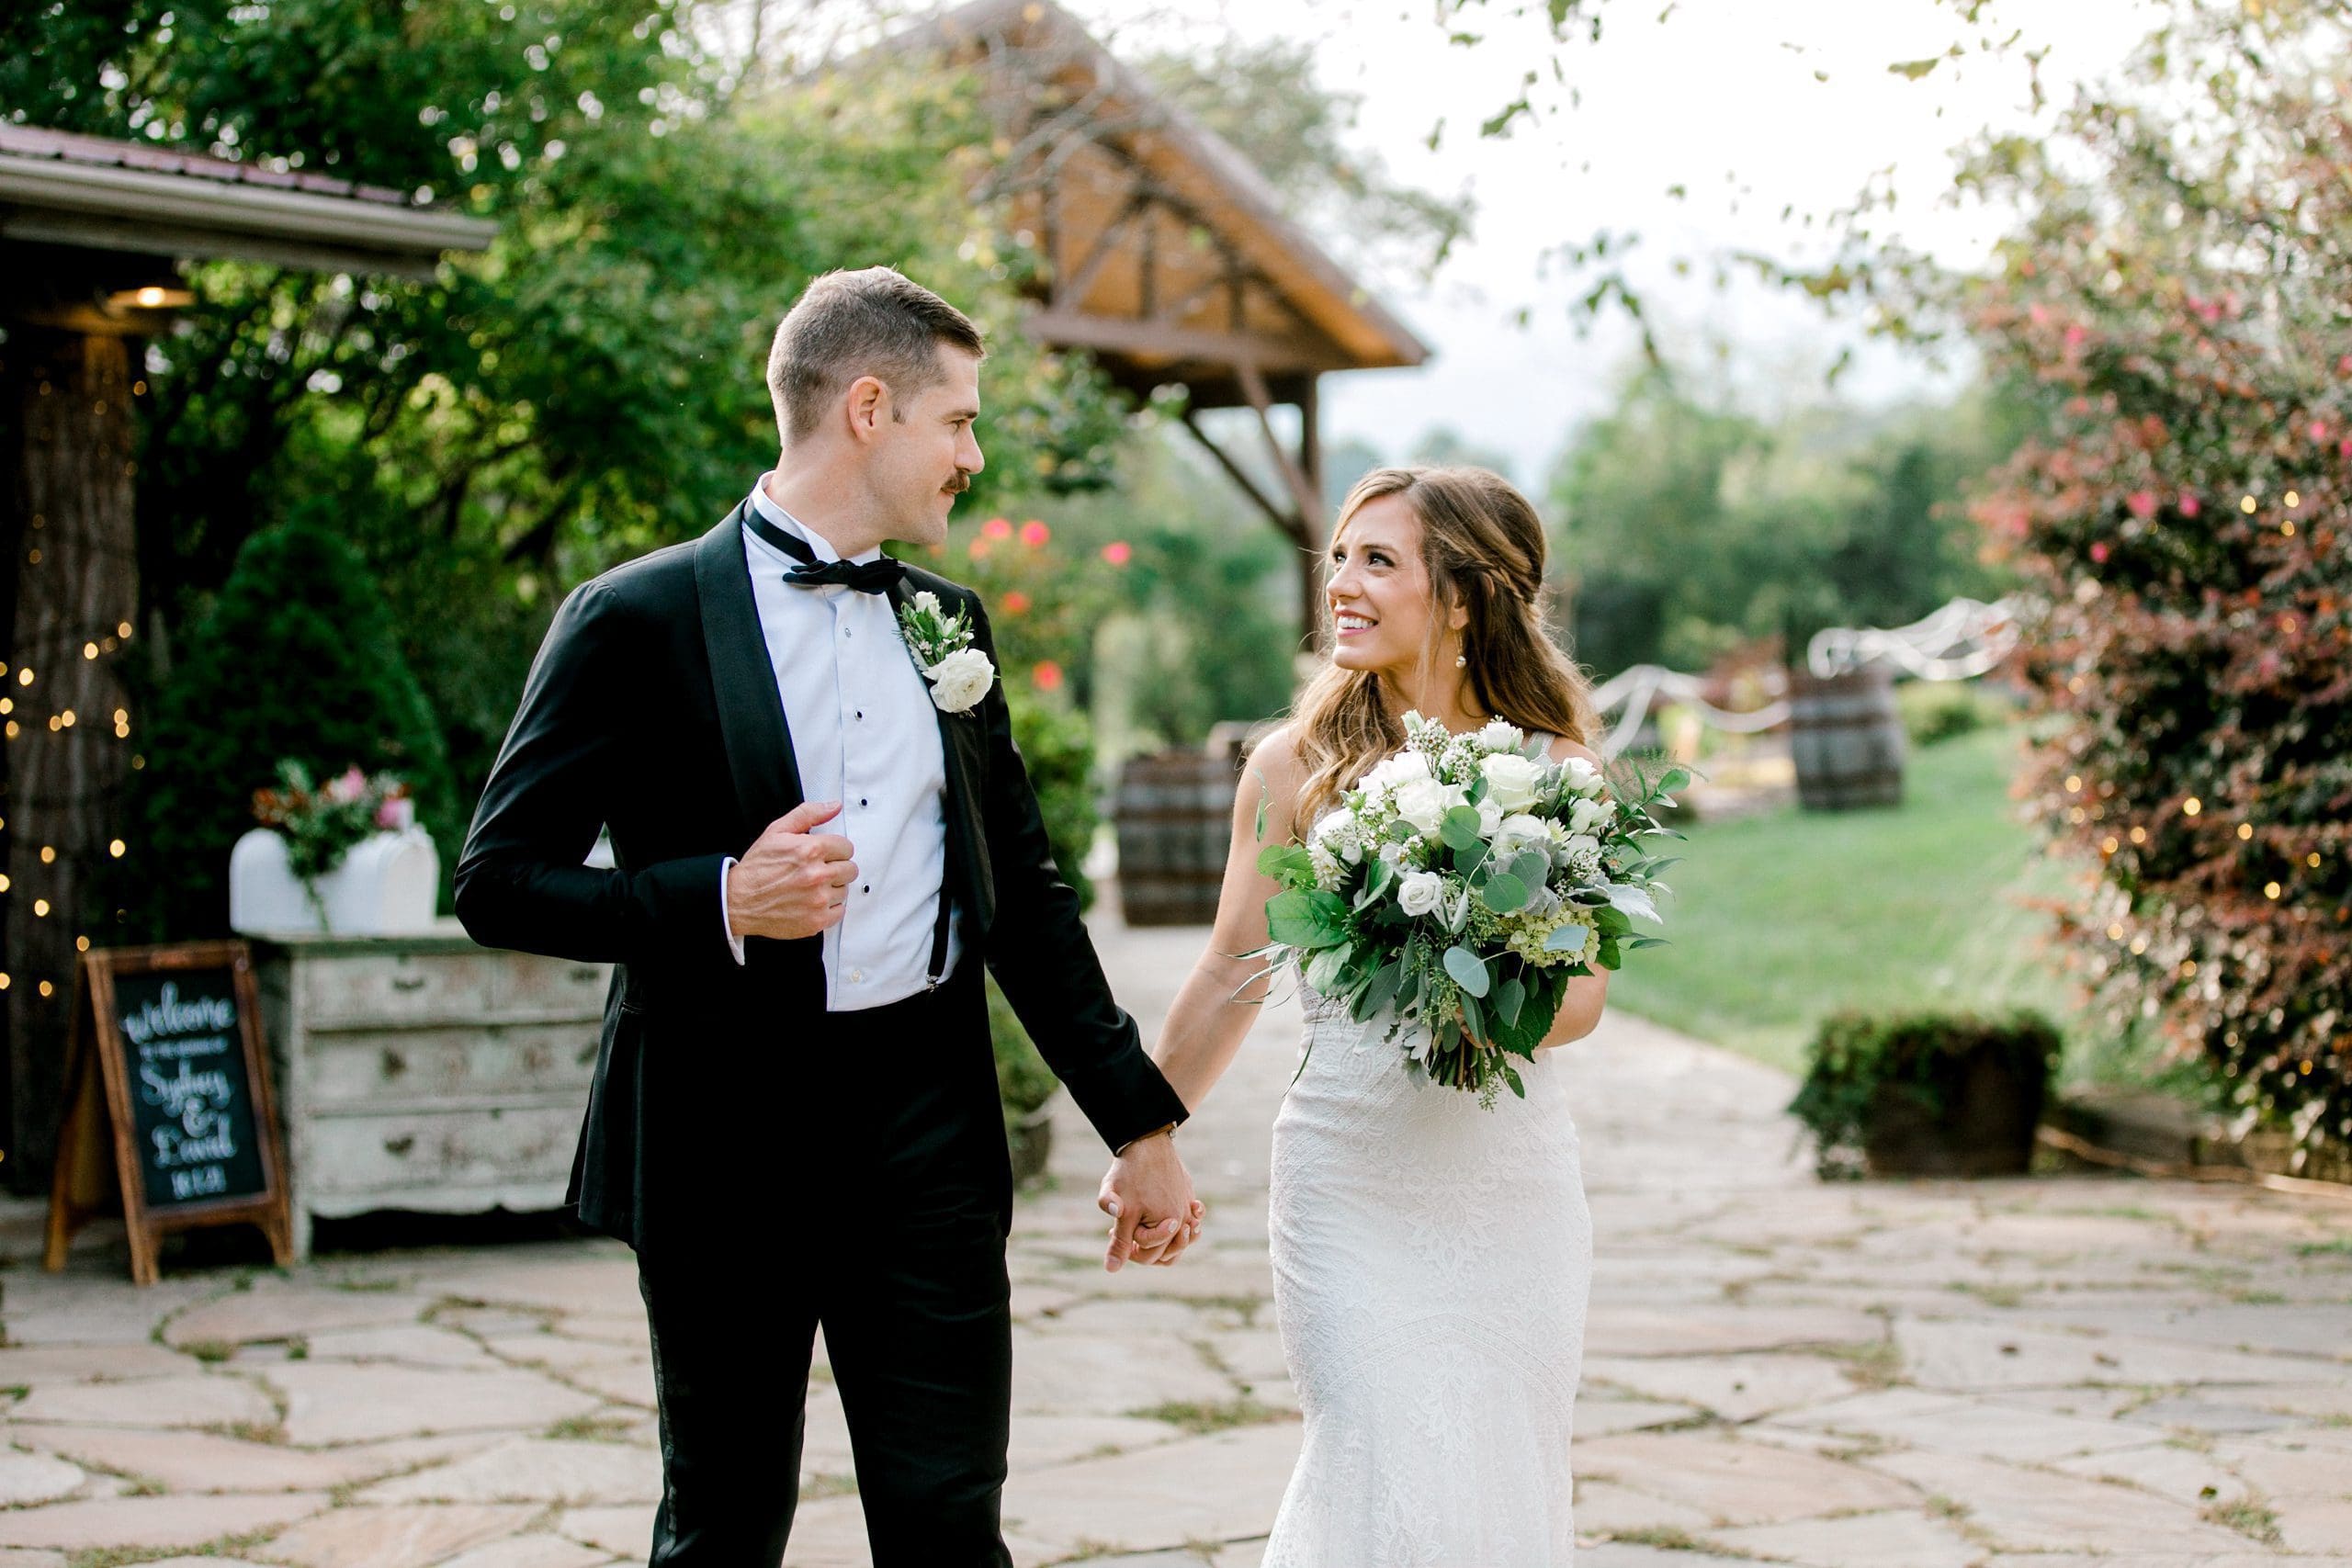 Classic Wedding at The Farm in Asheville NC | Asheville Wedding Photographer